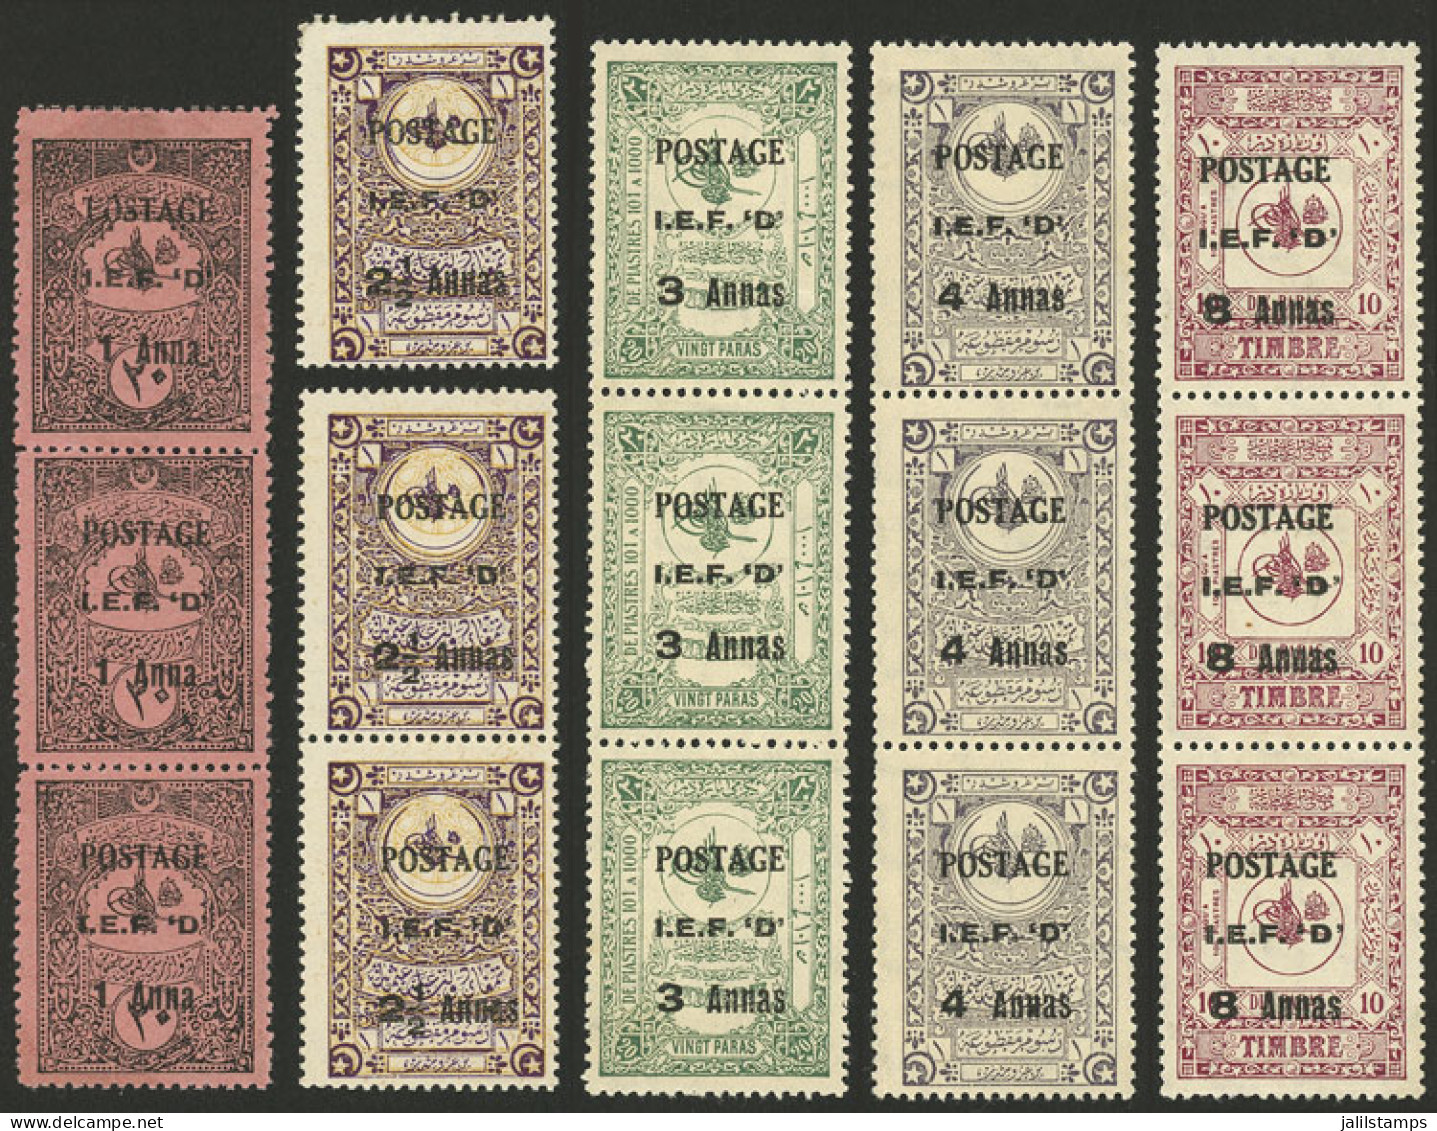 IRAQ: Sc.N43 + Other Values, 1919 5 Overprinted Values Of Turkey, Strips Of 3 (the 2½ Value In Pair + Single), MNH, Supe - Irak